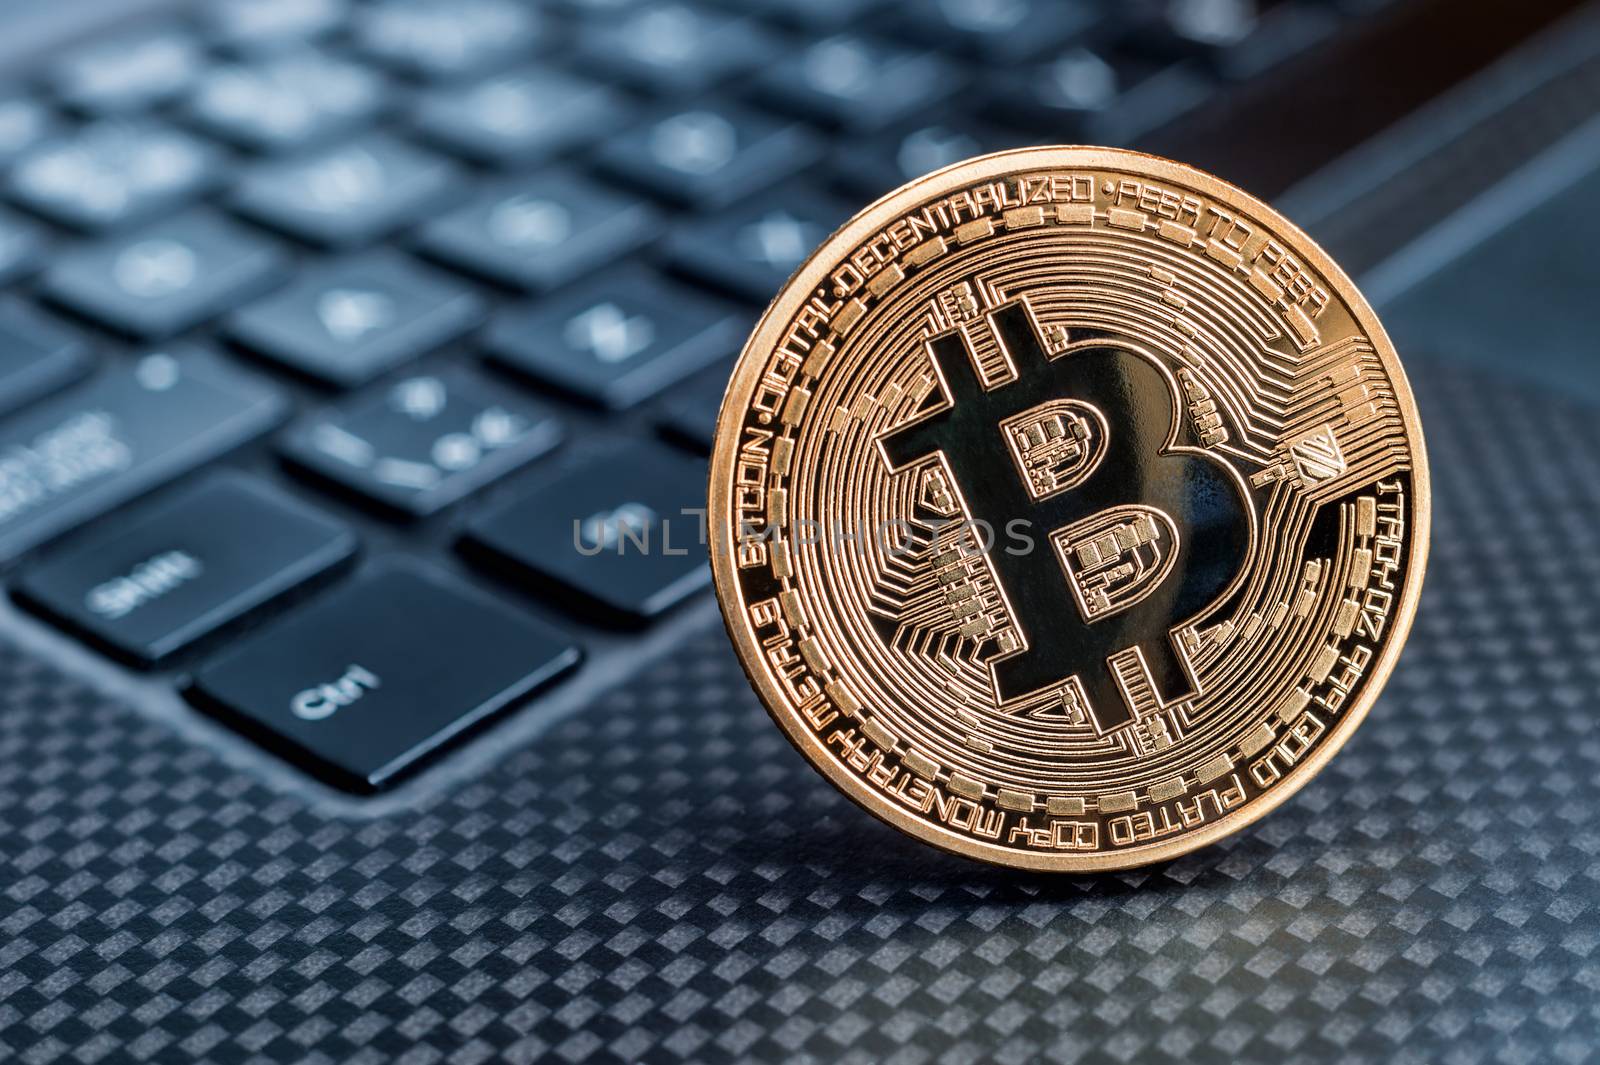 Bitcoin cryptocurrency golden coin on a keyboard